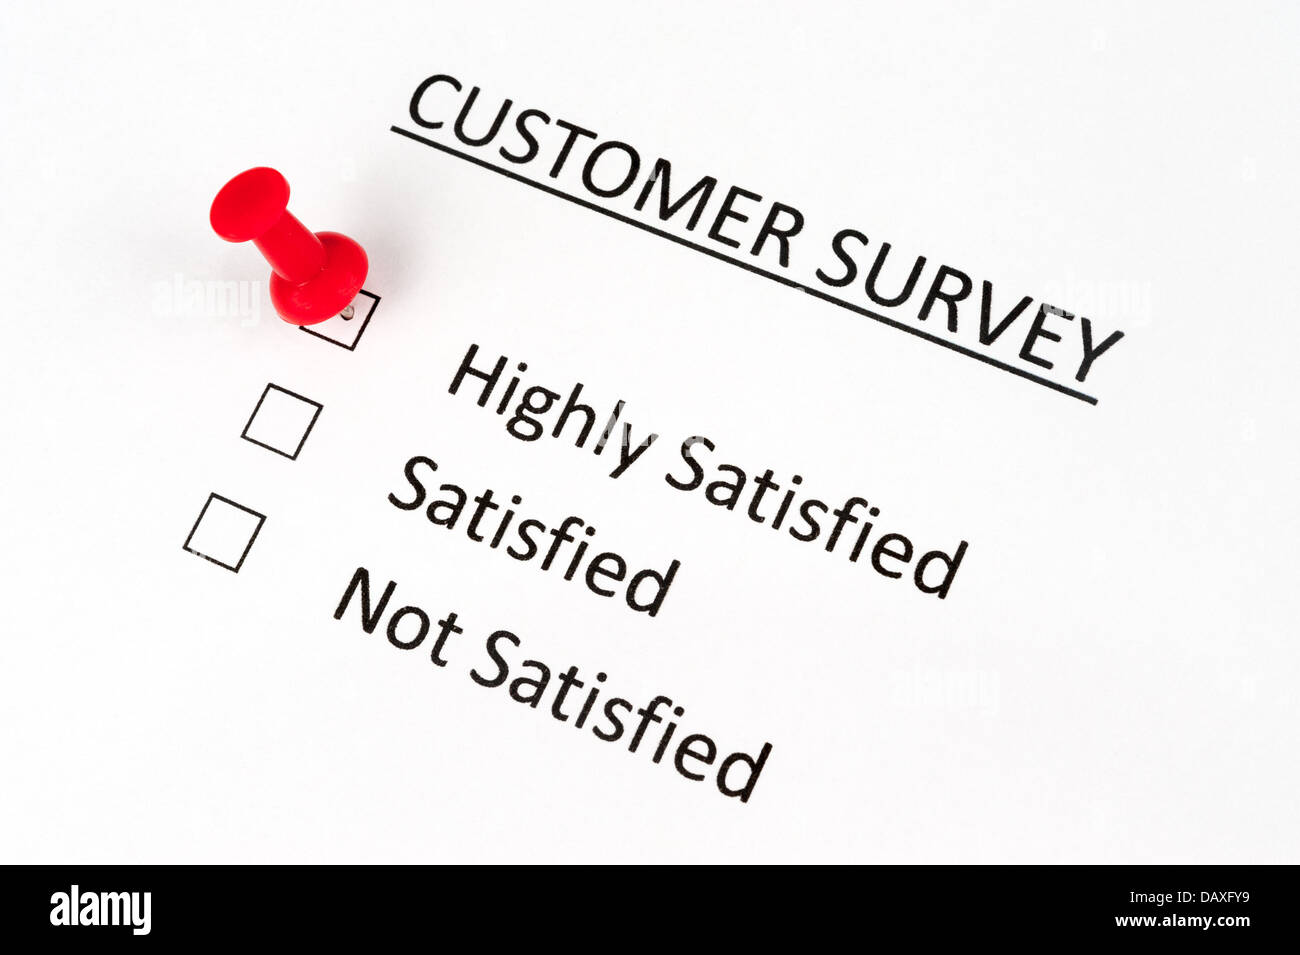 A thumbtack pinned on customer survey paper with options of highly satisfied, satisfied and not satisfied Stock Photo